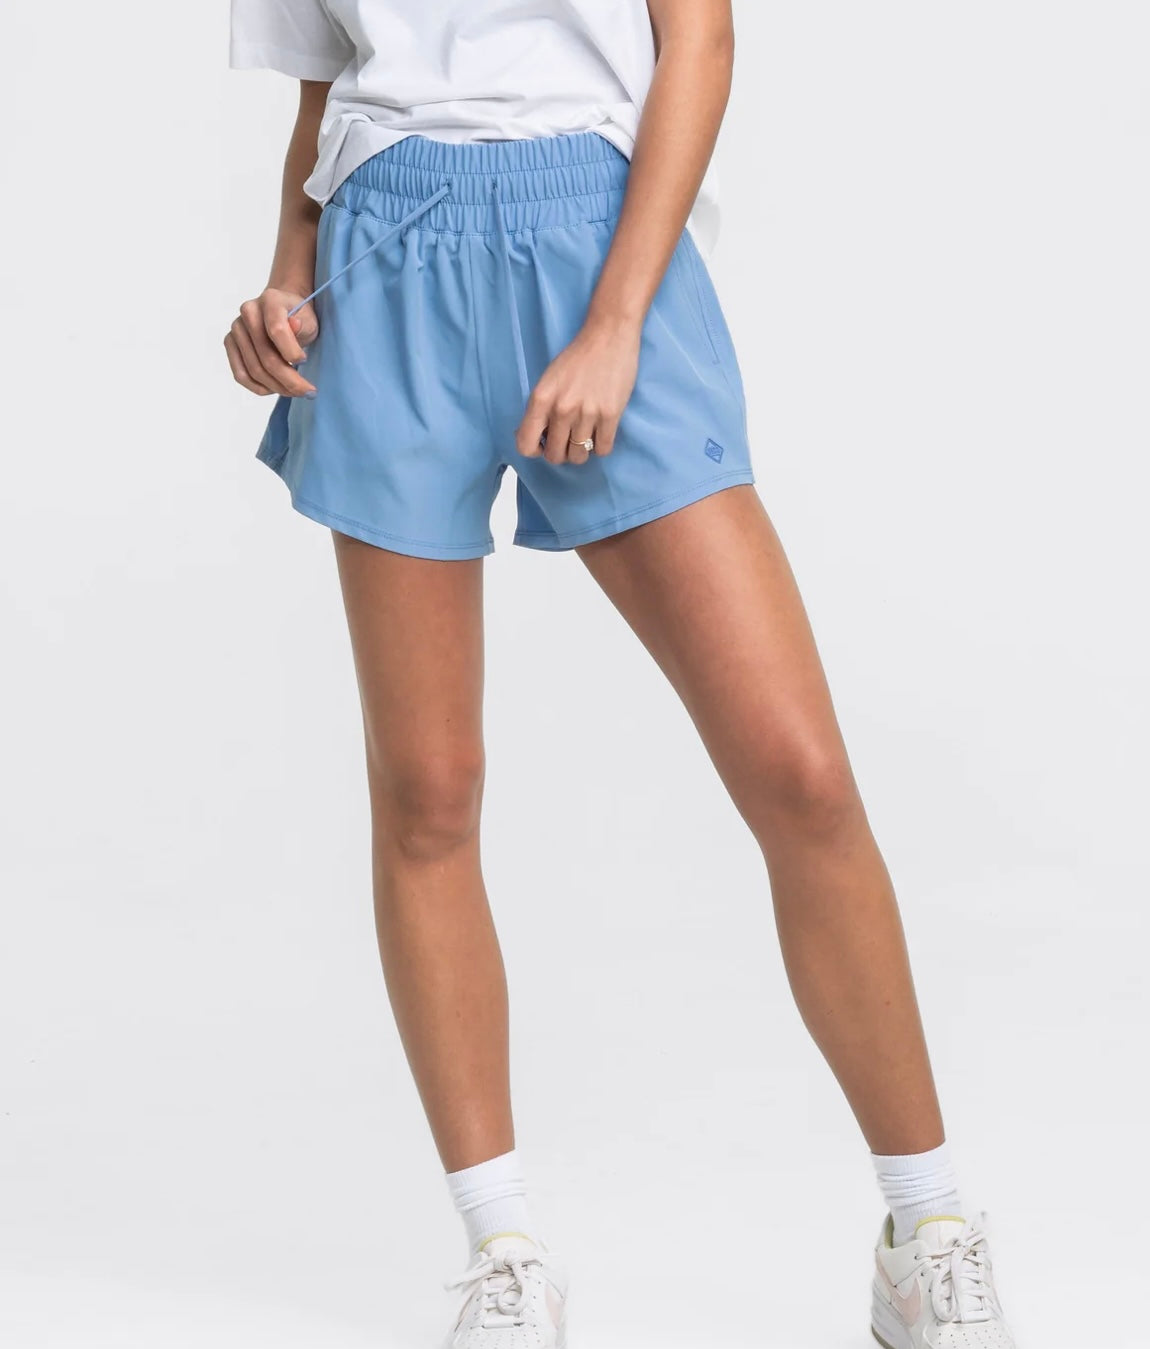 Women’s Hybrid Shorts in Blue Dreams by Southern Shirt Co.